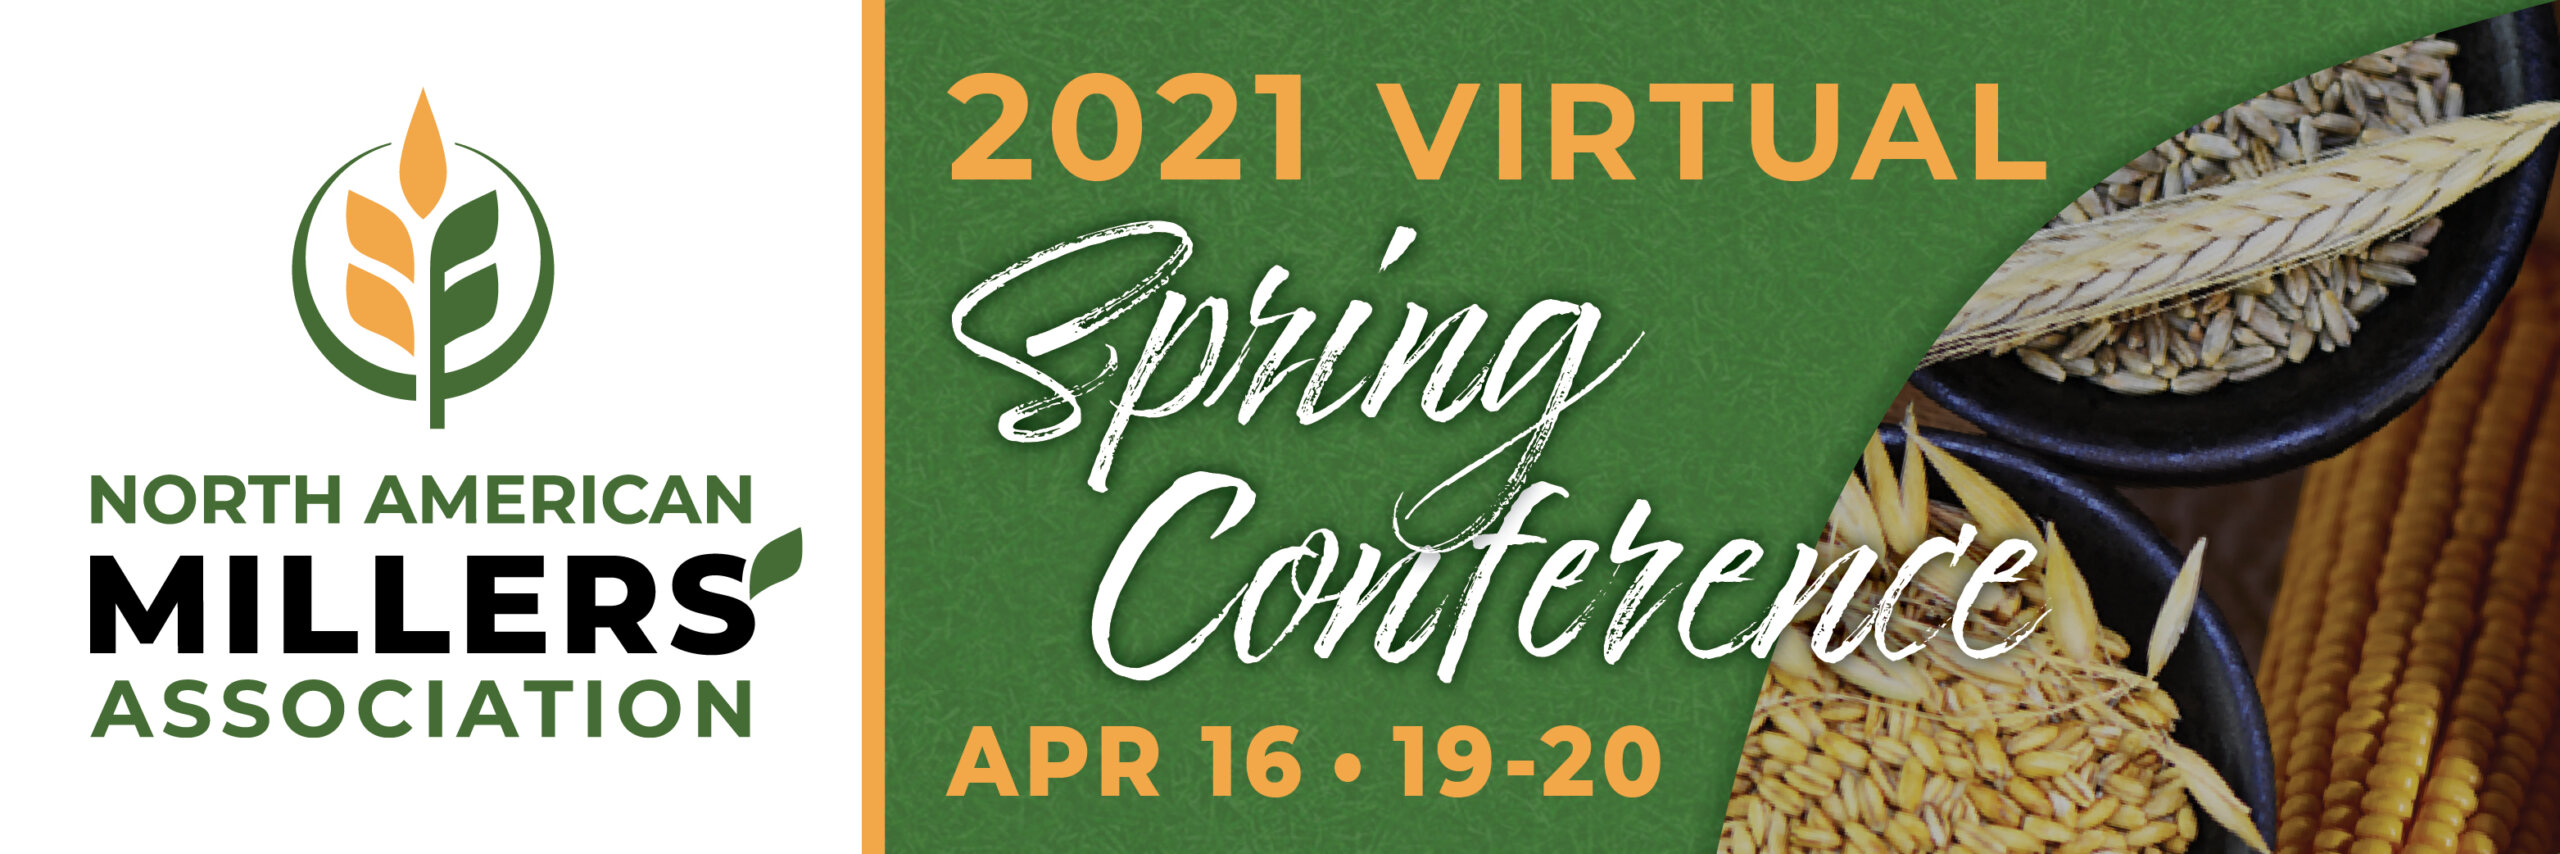 2021 Spring Conf Event Banner scaled